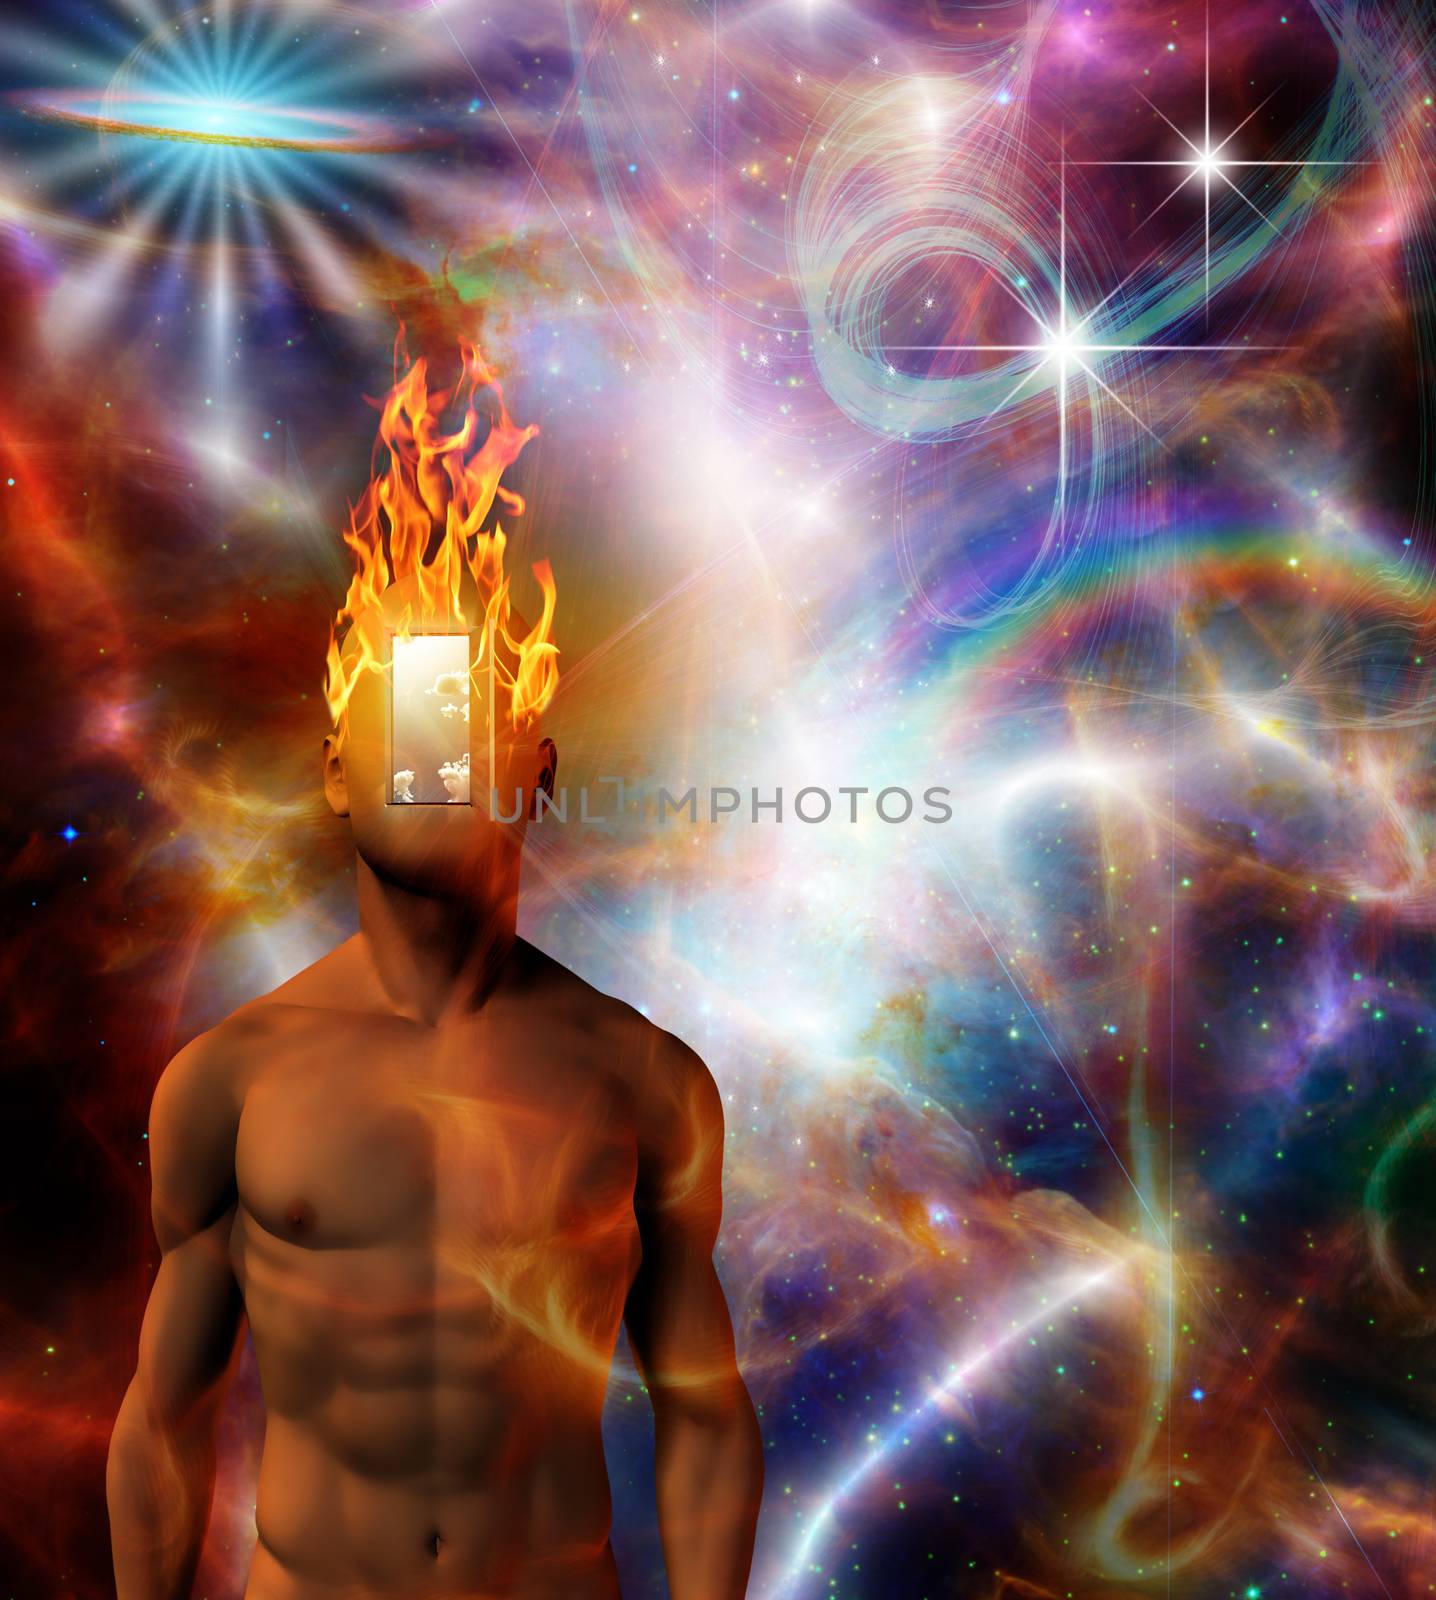 Surreal inspirational art. Burning mind in cosmic space